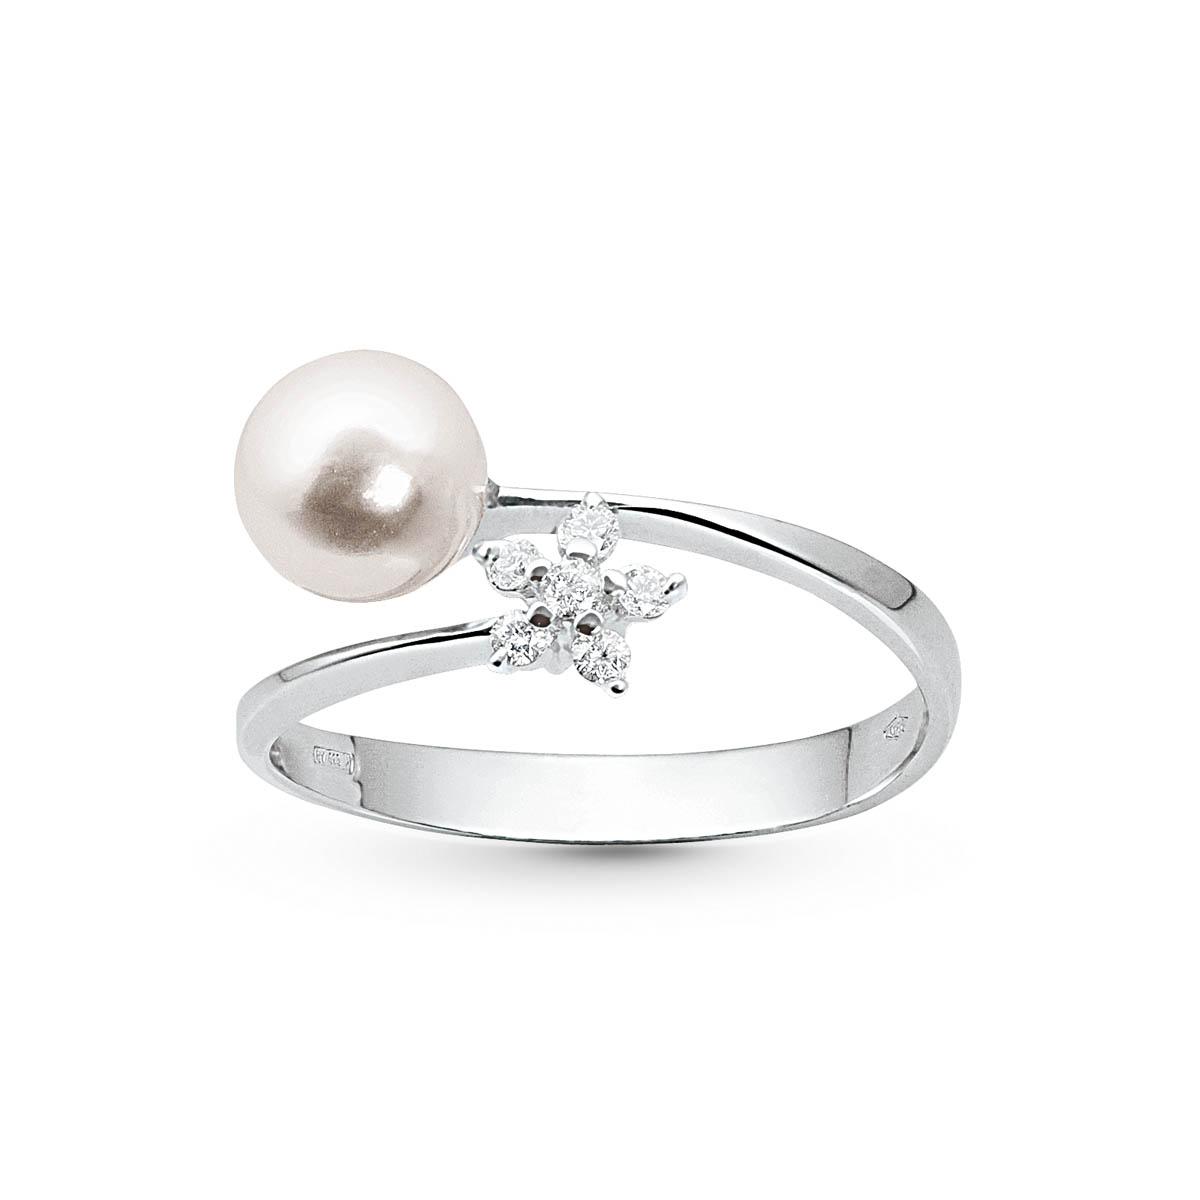 18 kt white gold ring with star diamonds and sea pearl 6-6.50 mm - AD189-LB